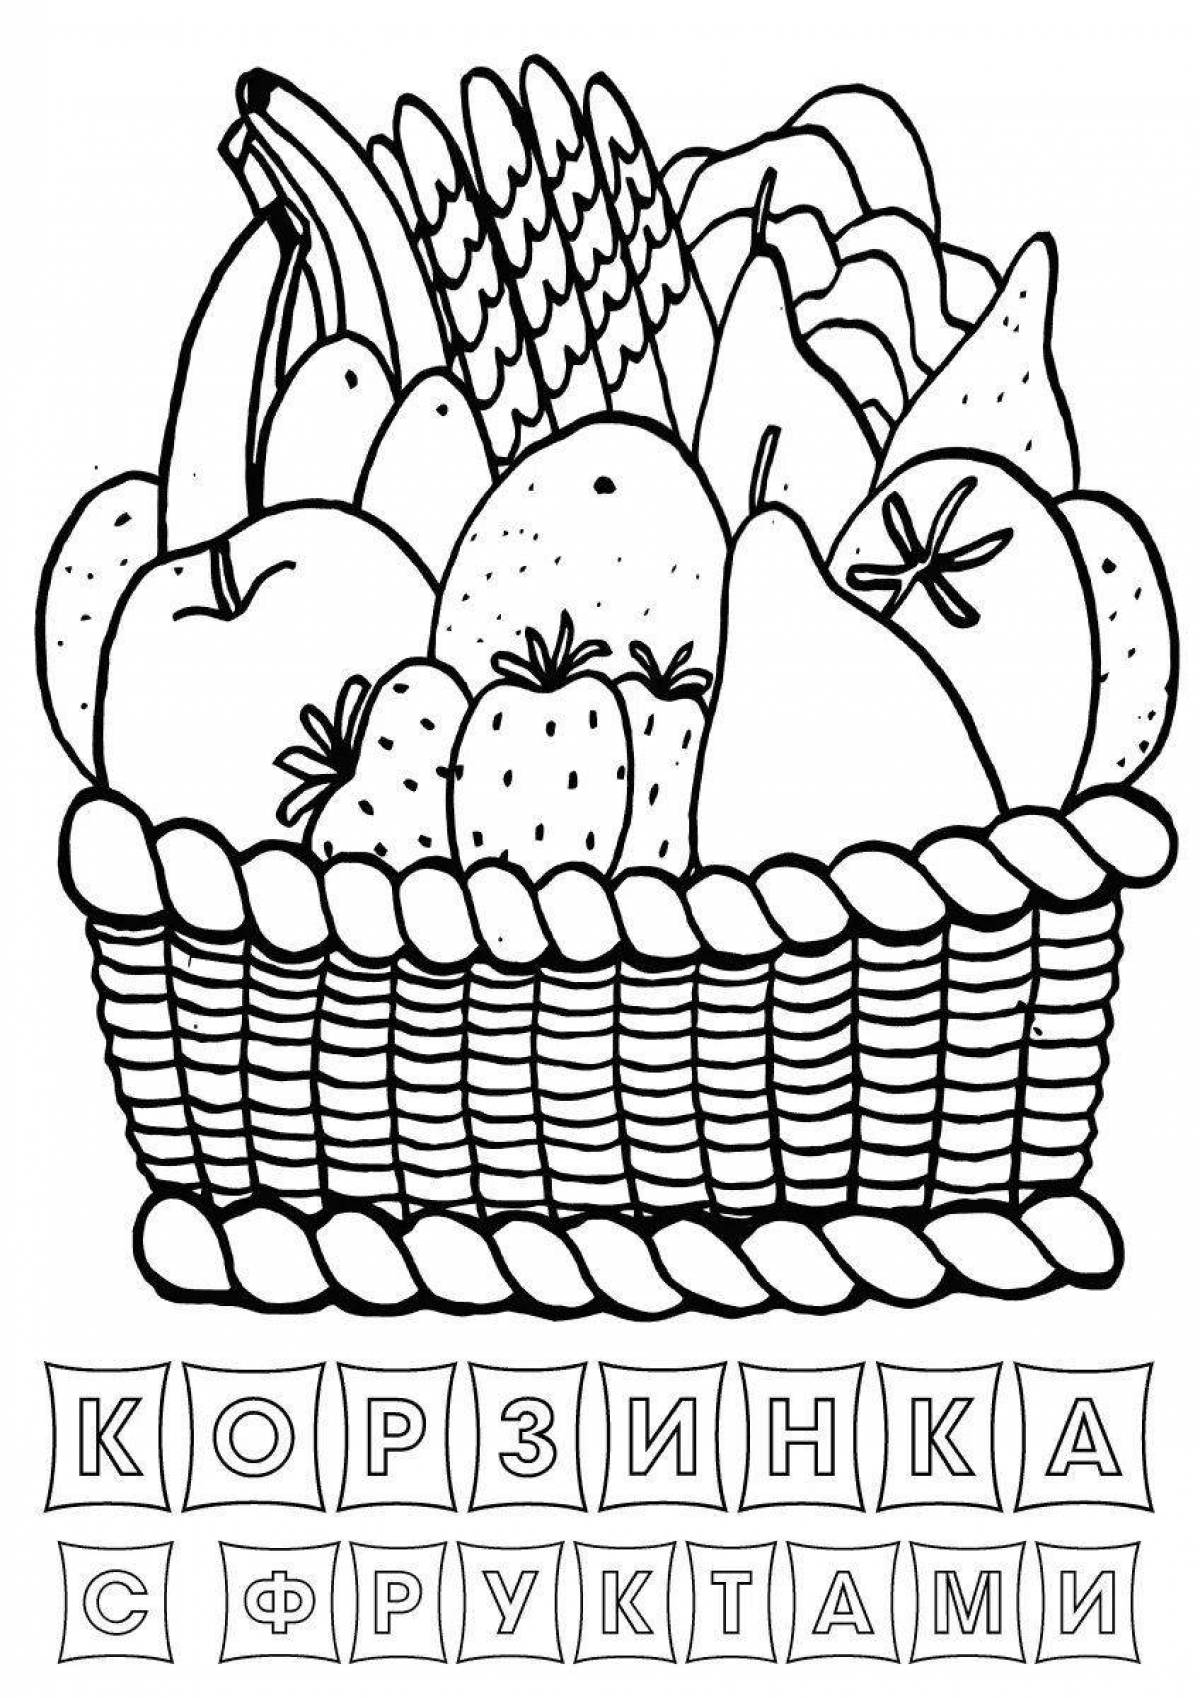 Gorgeous fruit basket coloring book for kids